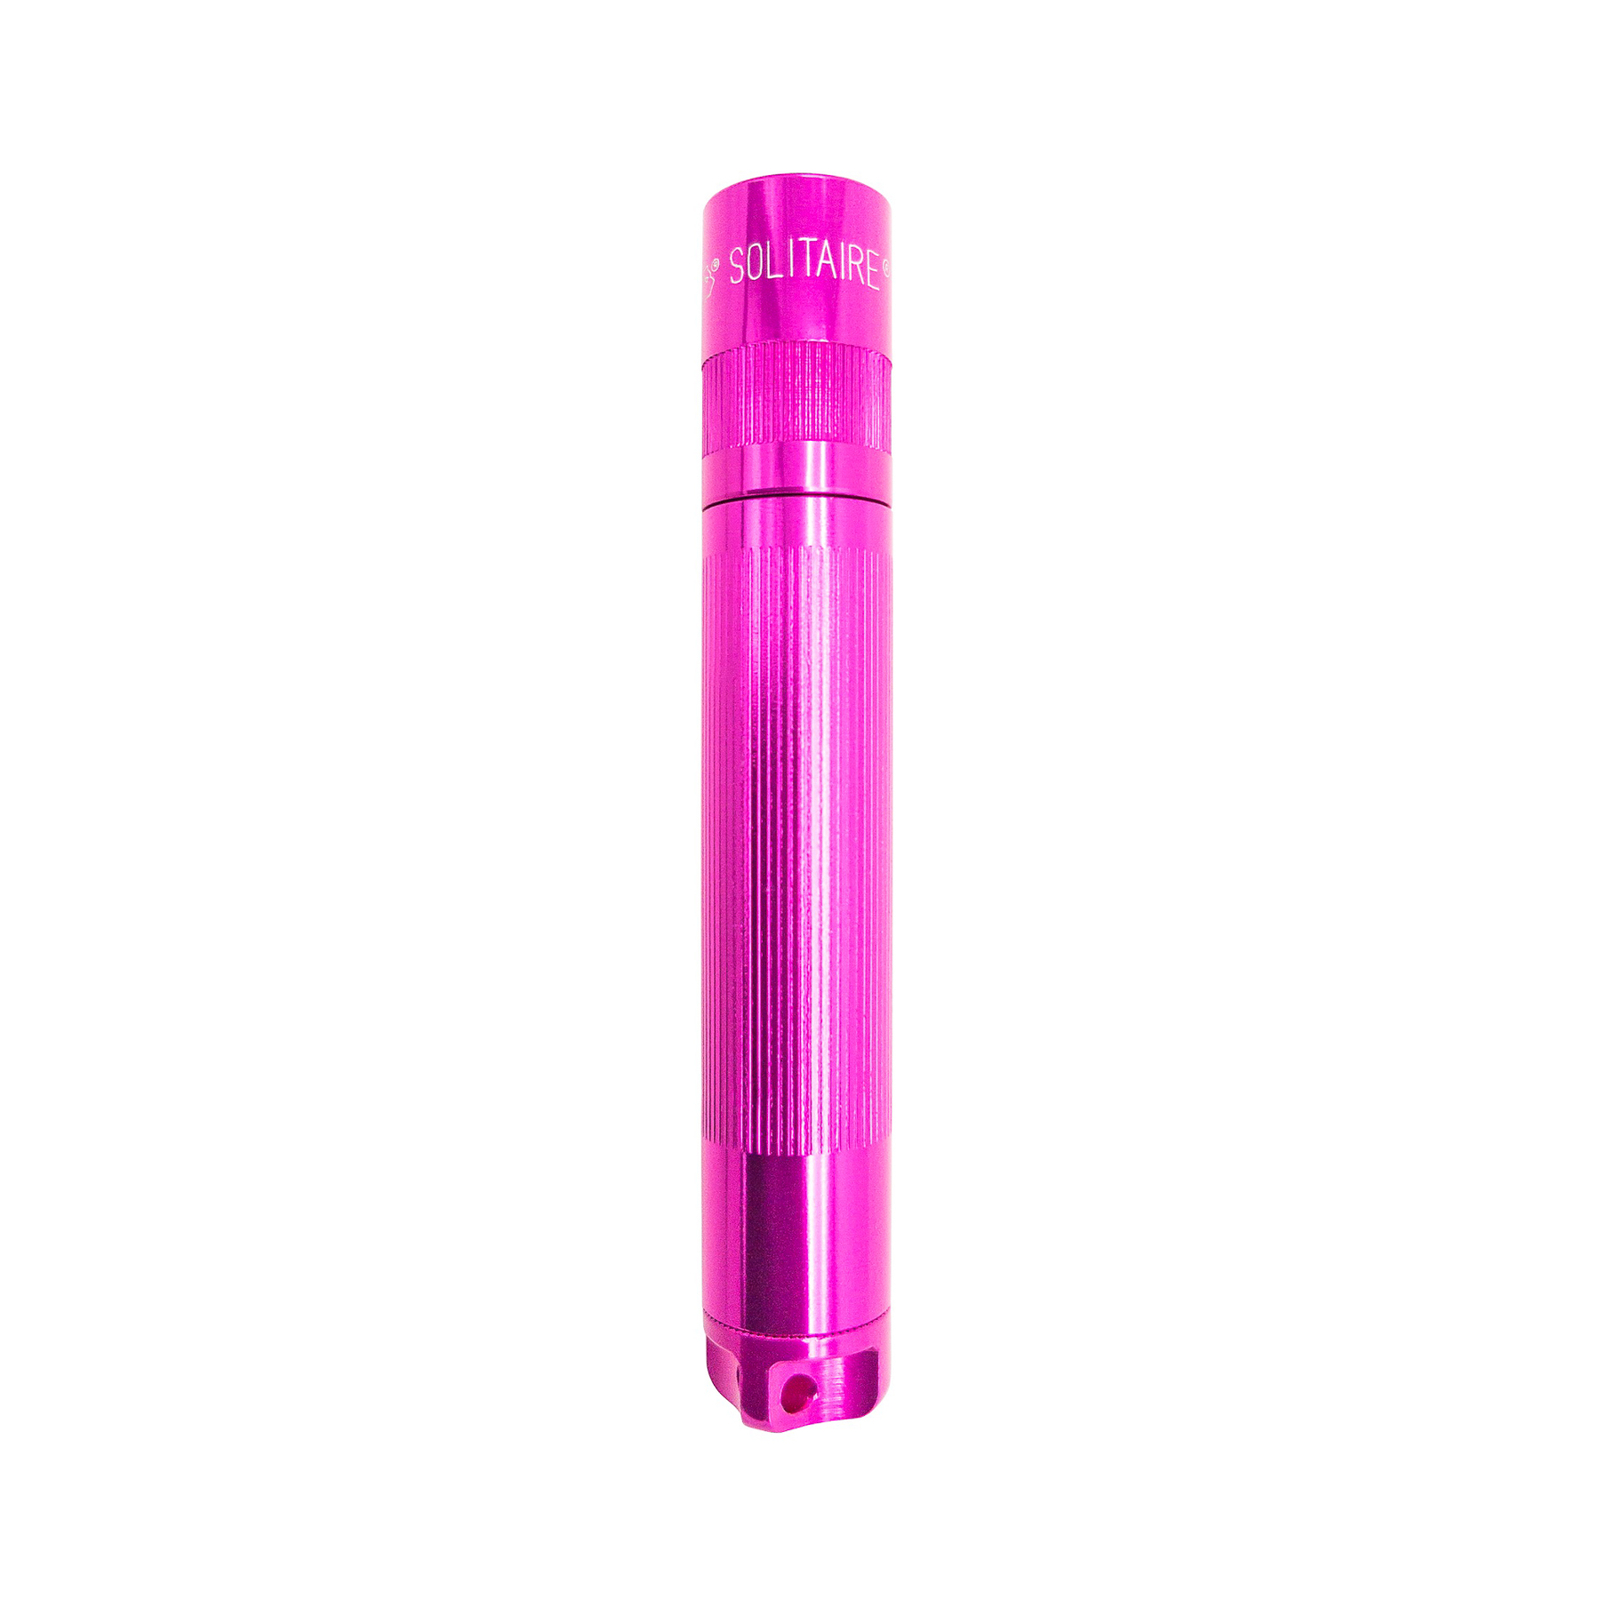 Maglite LED zaklamp Solitaire, 1 Cell AAA, roze